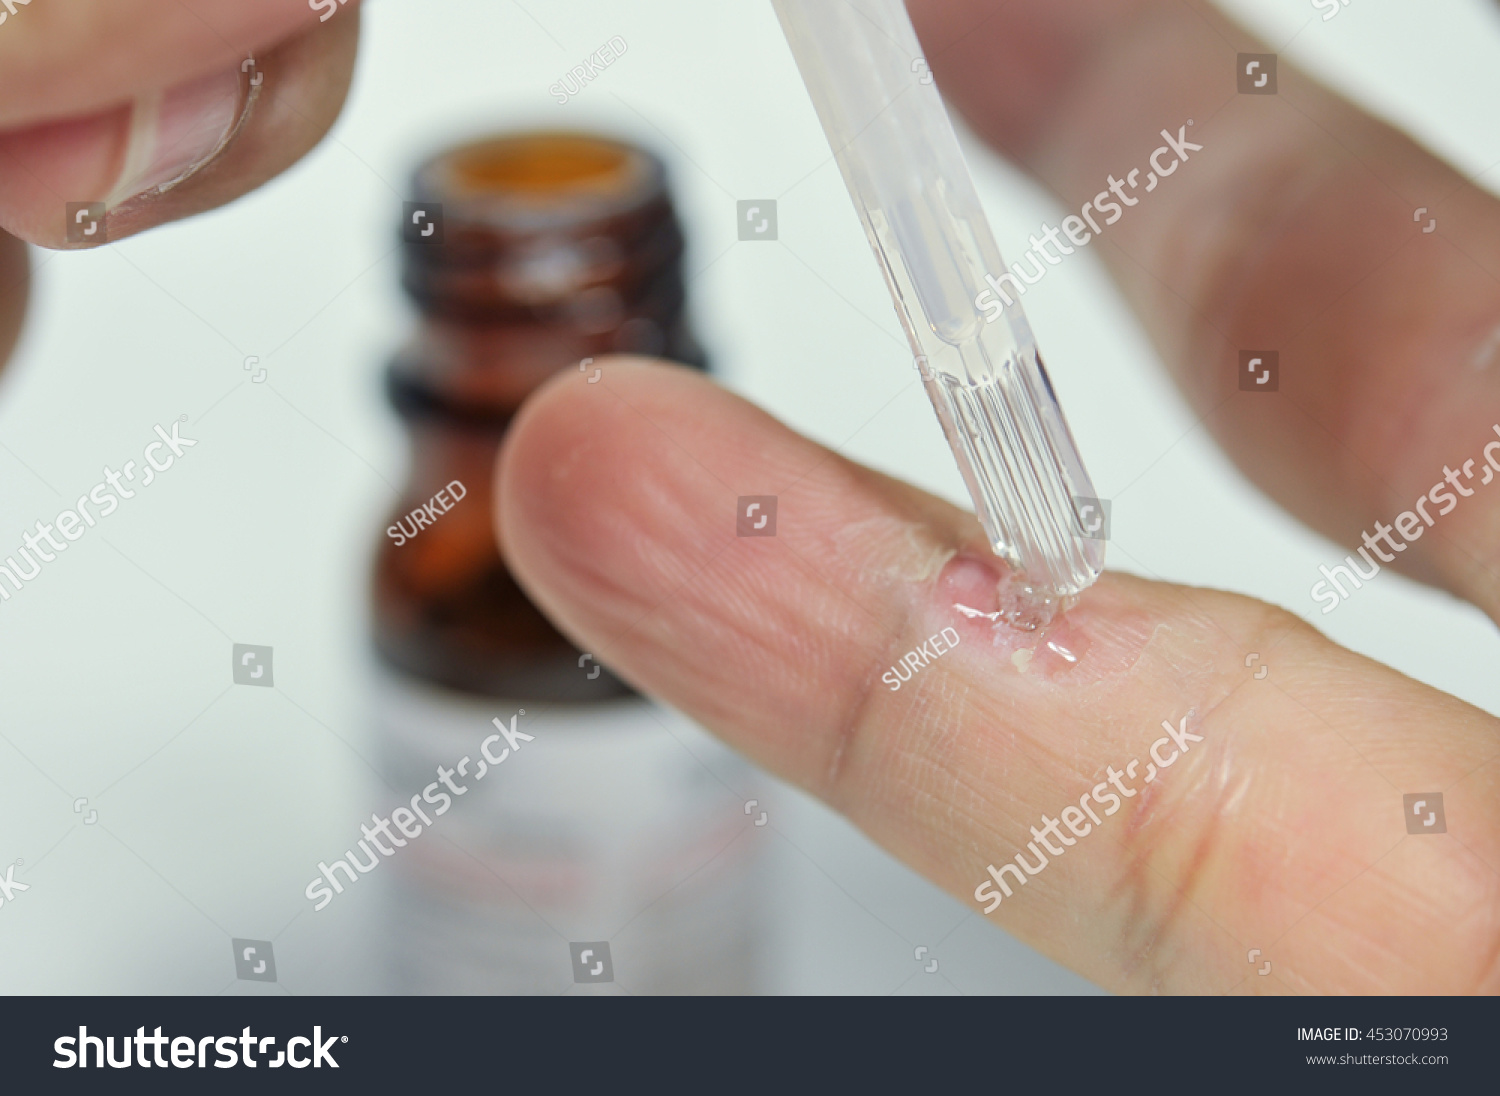 wart on finger with treatment by salicylic acid. wart on the finger verruca freeze concept blurred neutral background, selective focus, #453070993